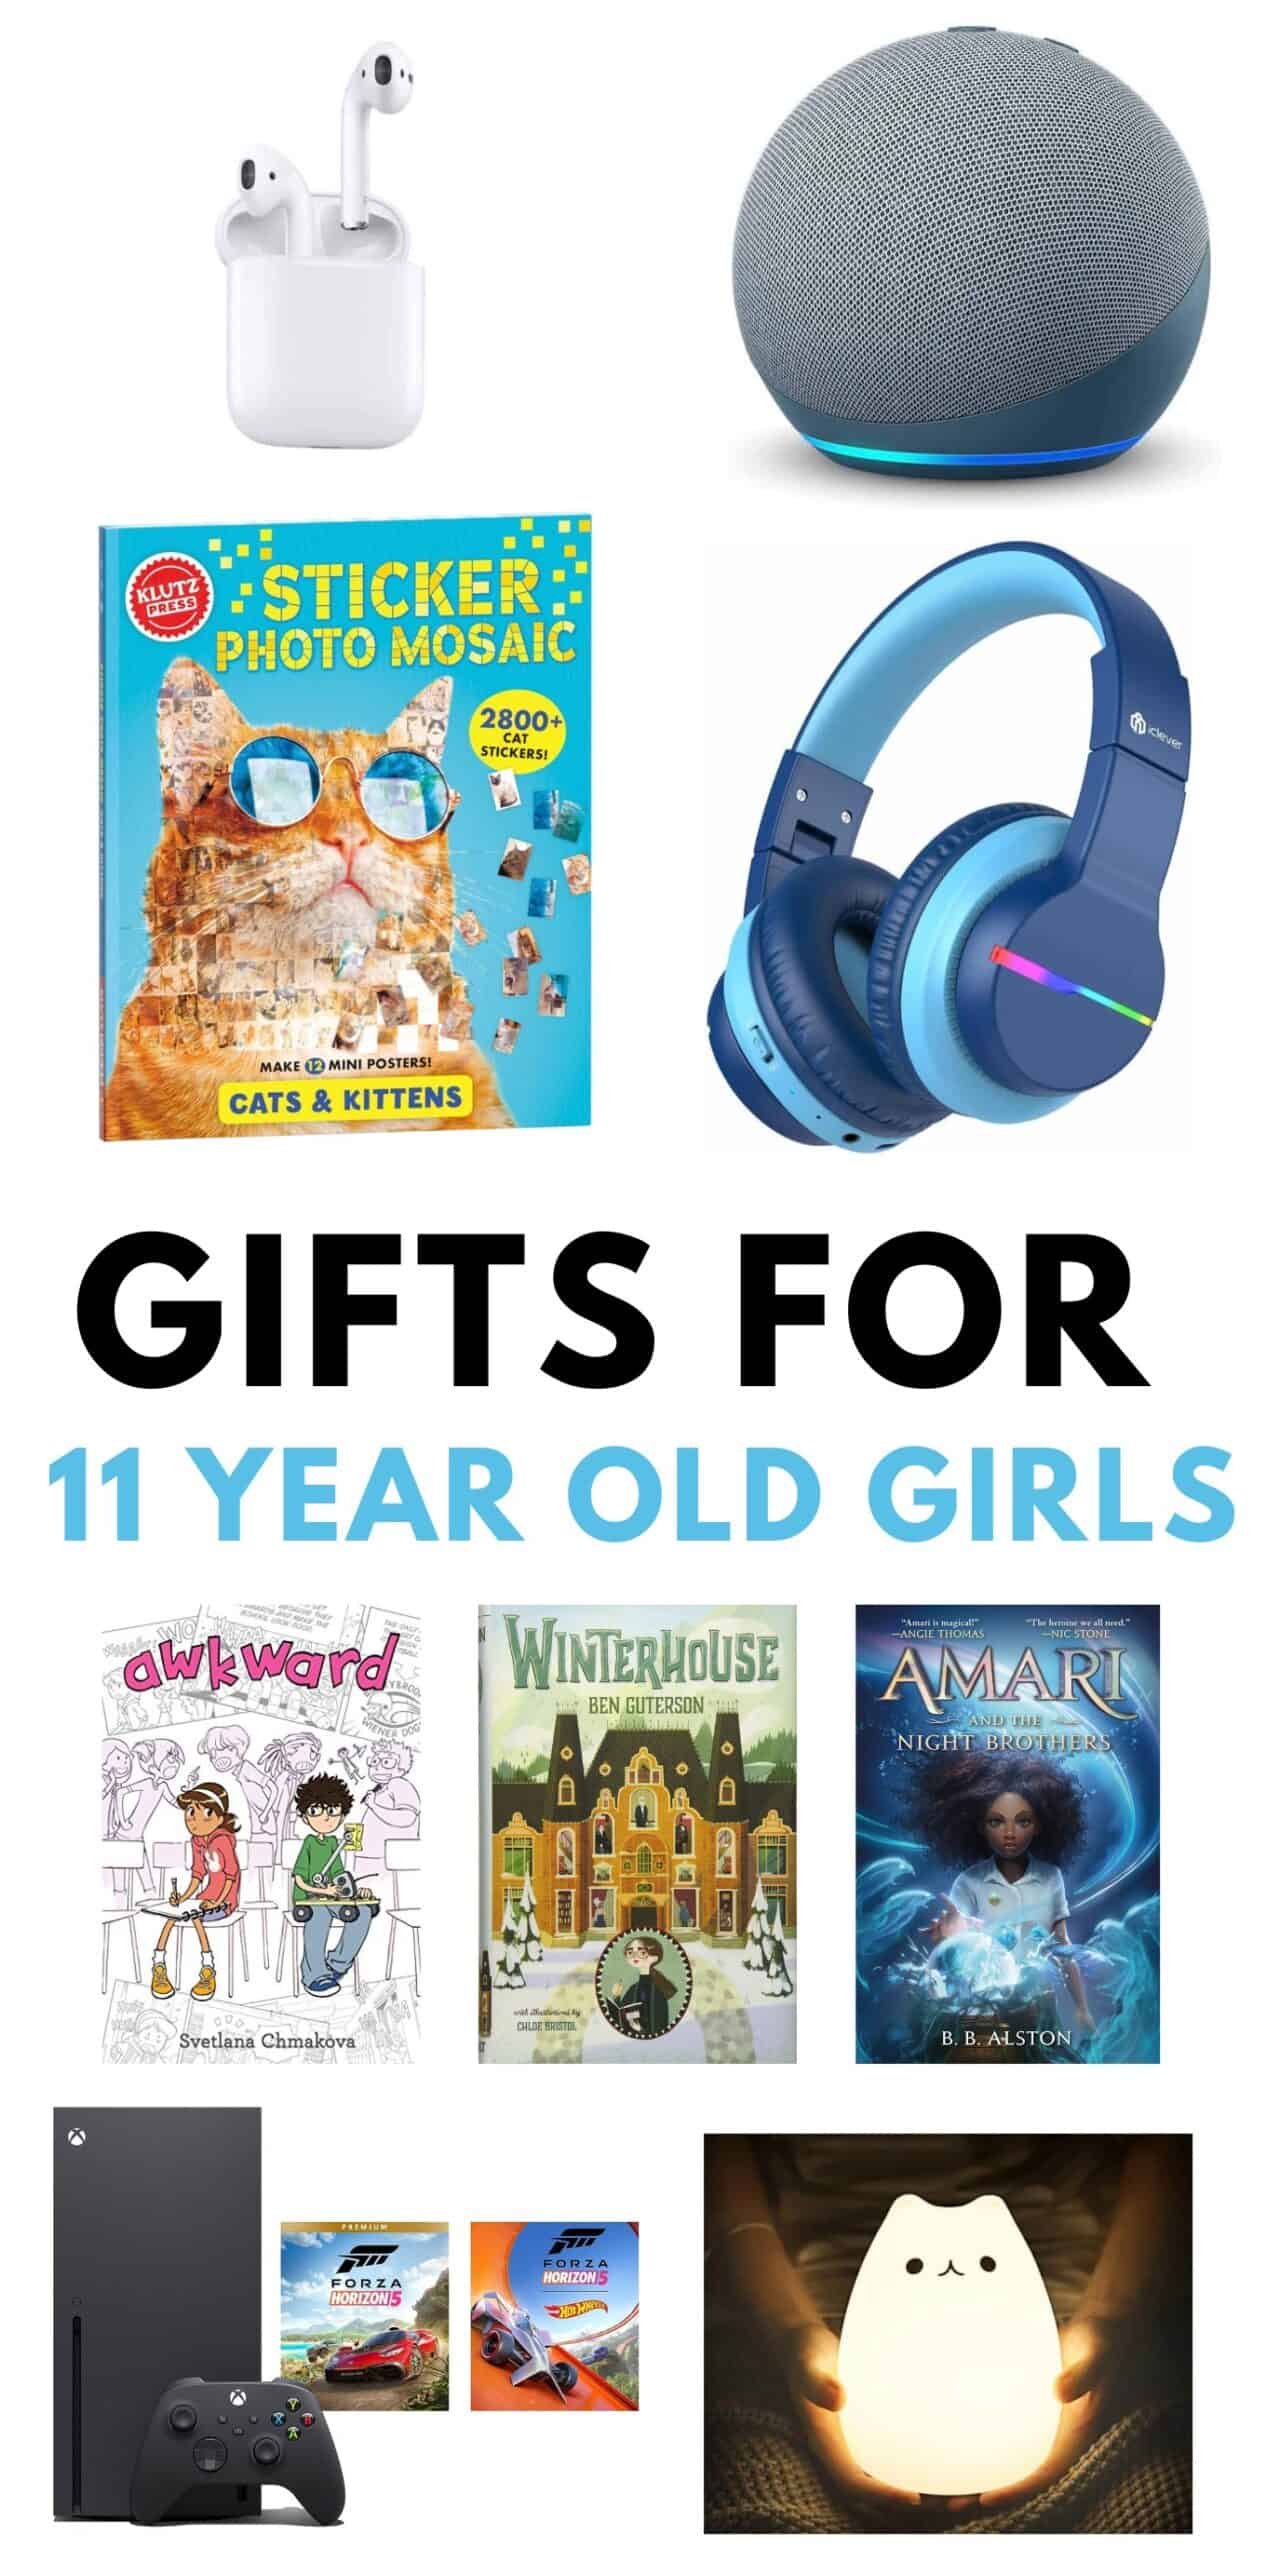 Toys for age 8-11 girls in Toys for Kids 8 to 11 Years 